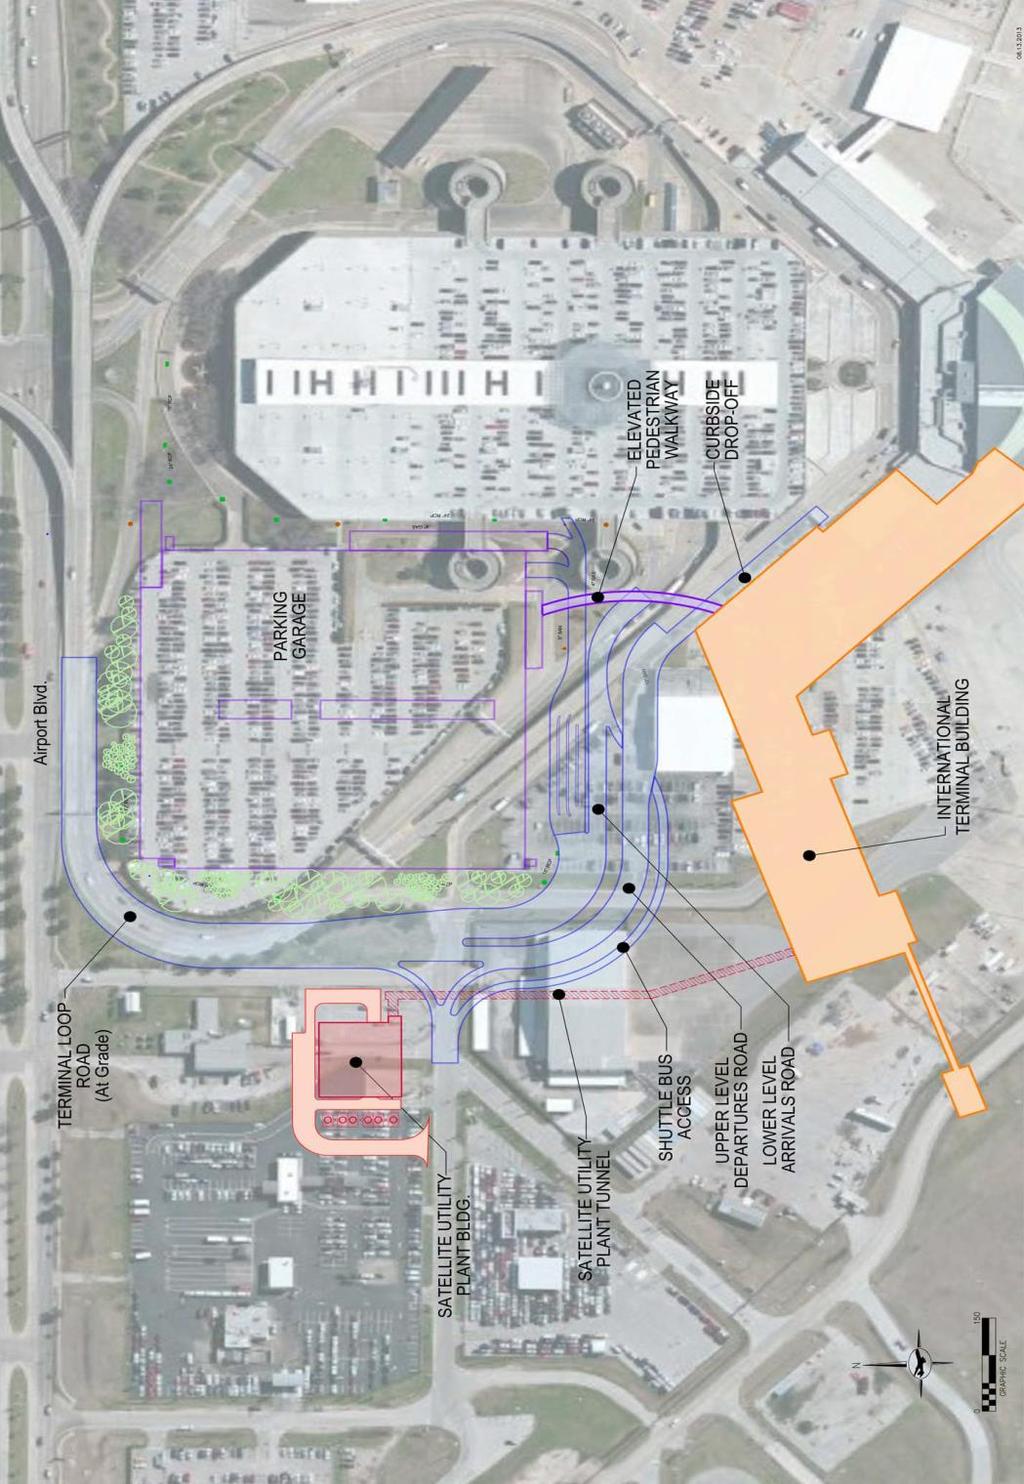 NOTICE OF OPPORTUNITY FOR PUBLIC COMMENT RELATED TO PASSENGER FACILITY CHARGE APPLICATION The Houston Airport System (HAS) is providing an opportunity for public comment until November 2, 2015